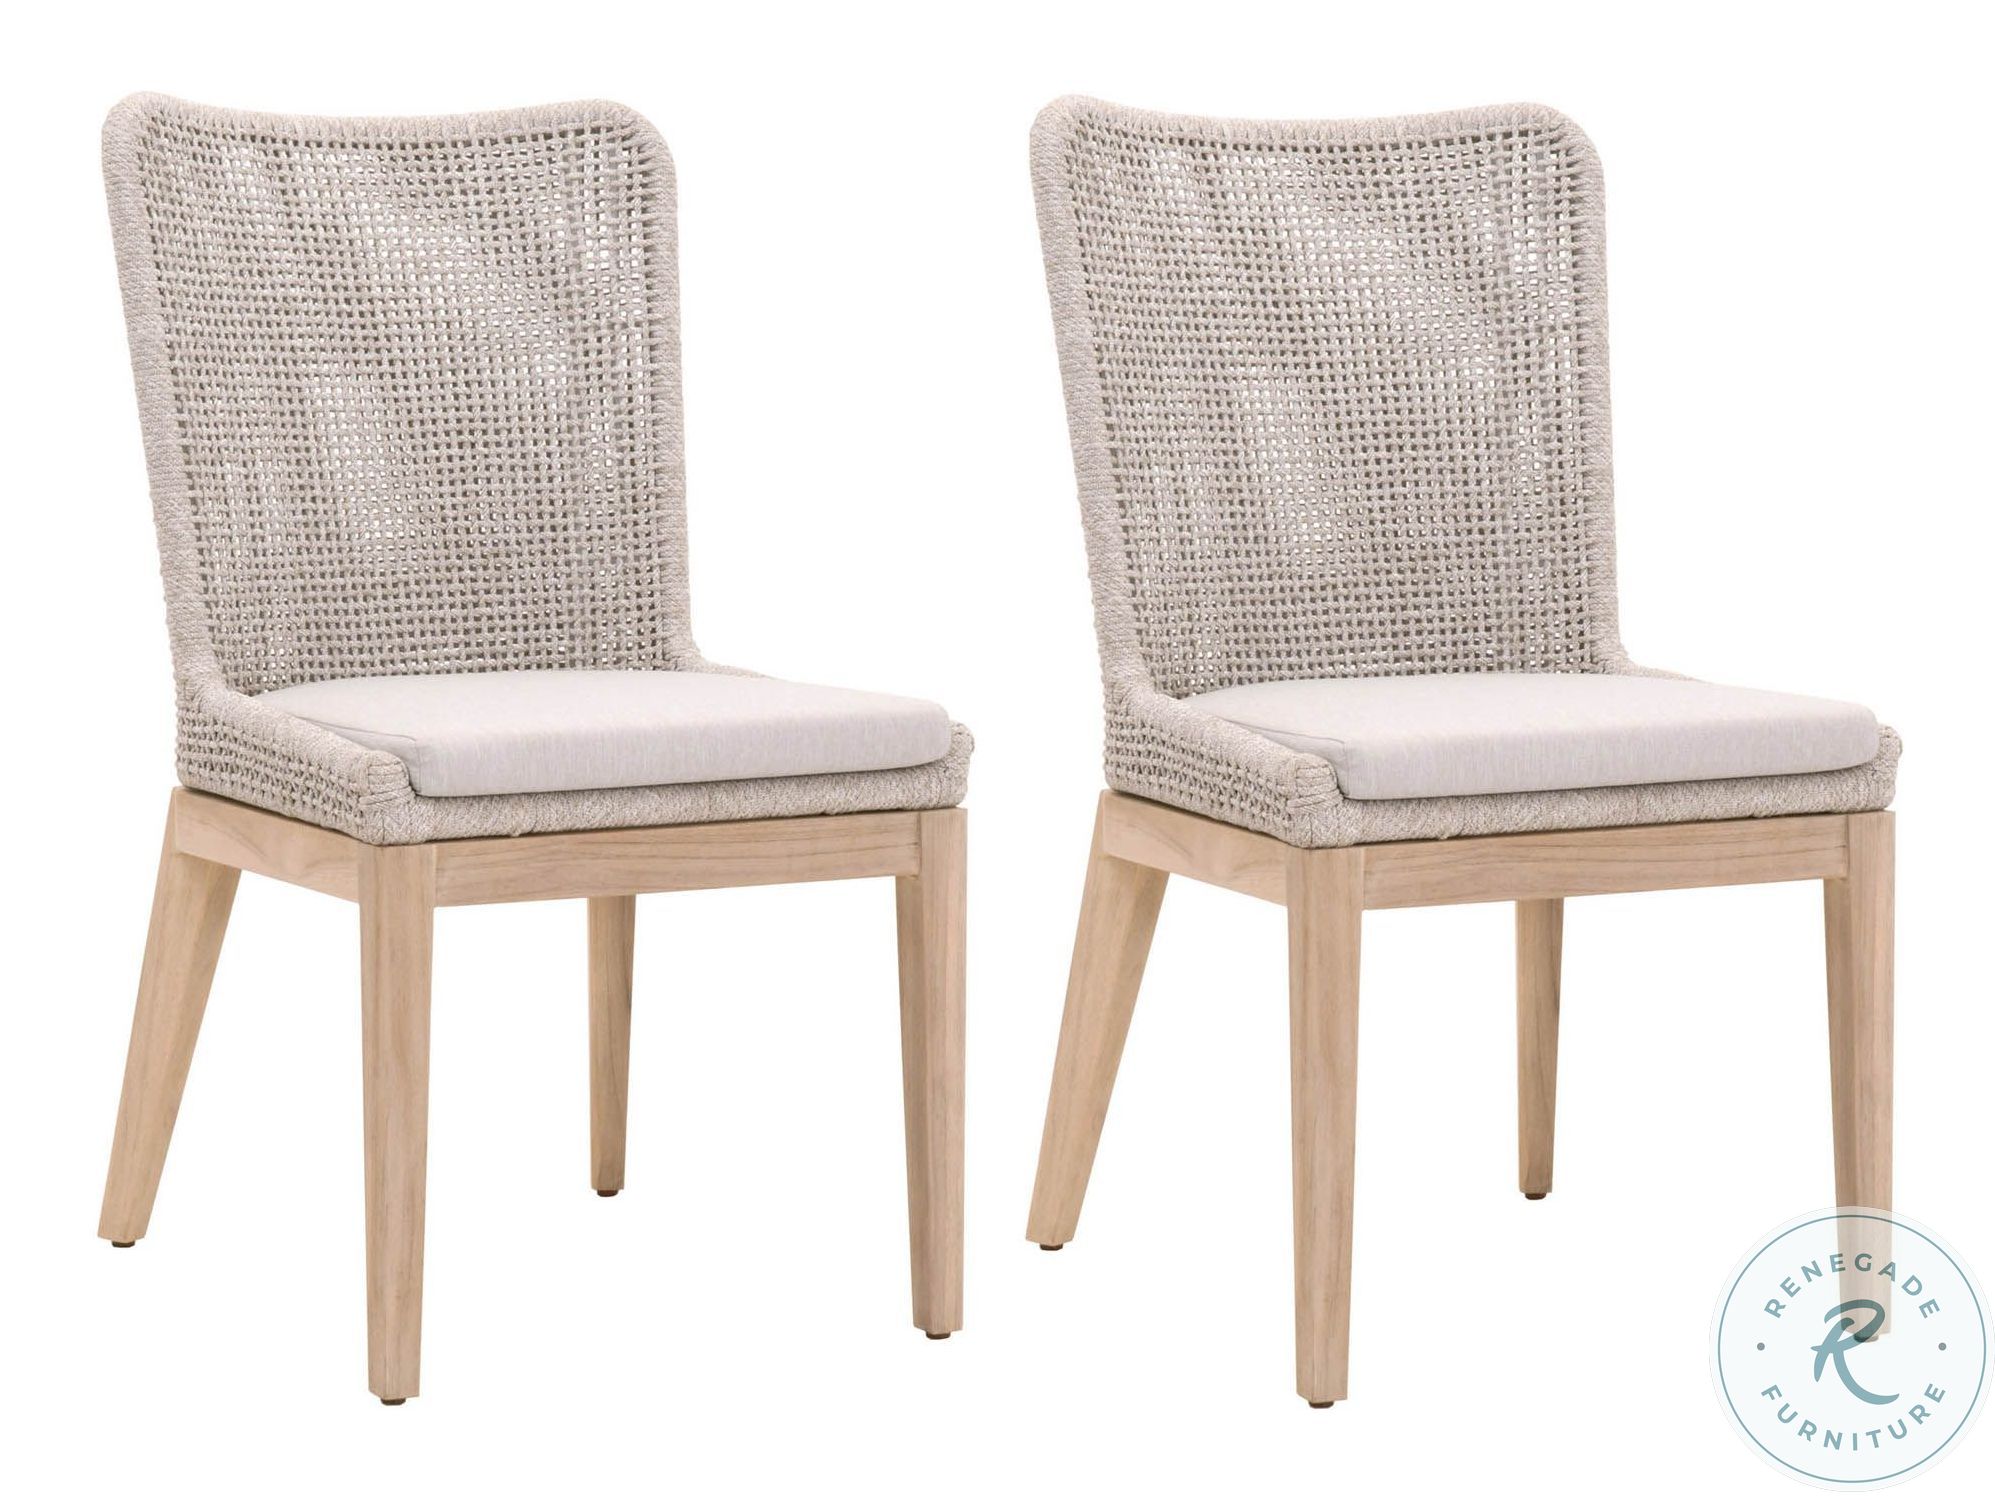 Woven Taupe And White Flat Rope Mesh Outdoor Dining Chair Set Of 2